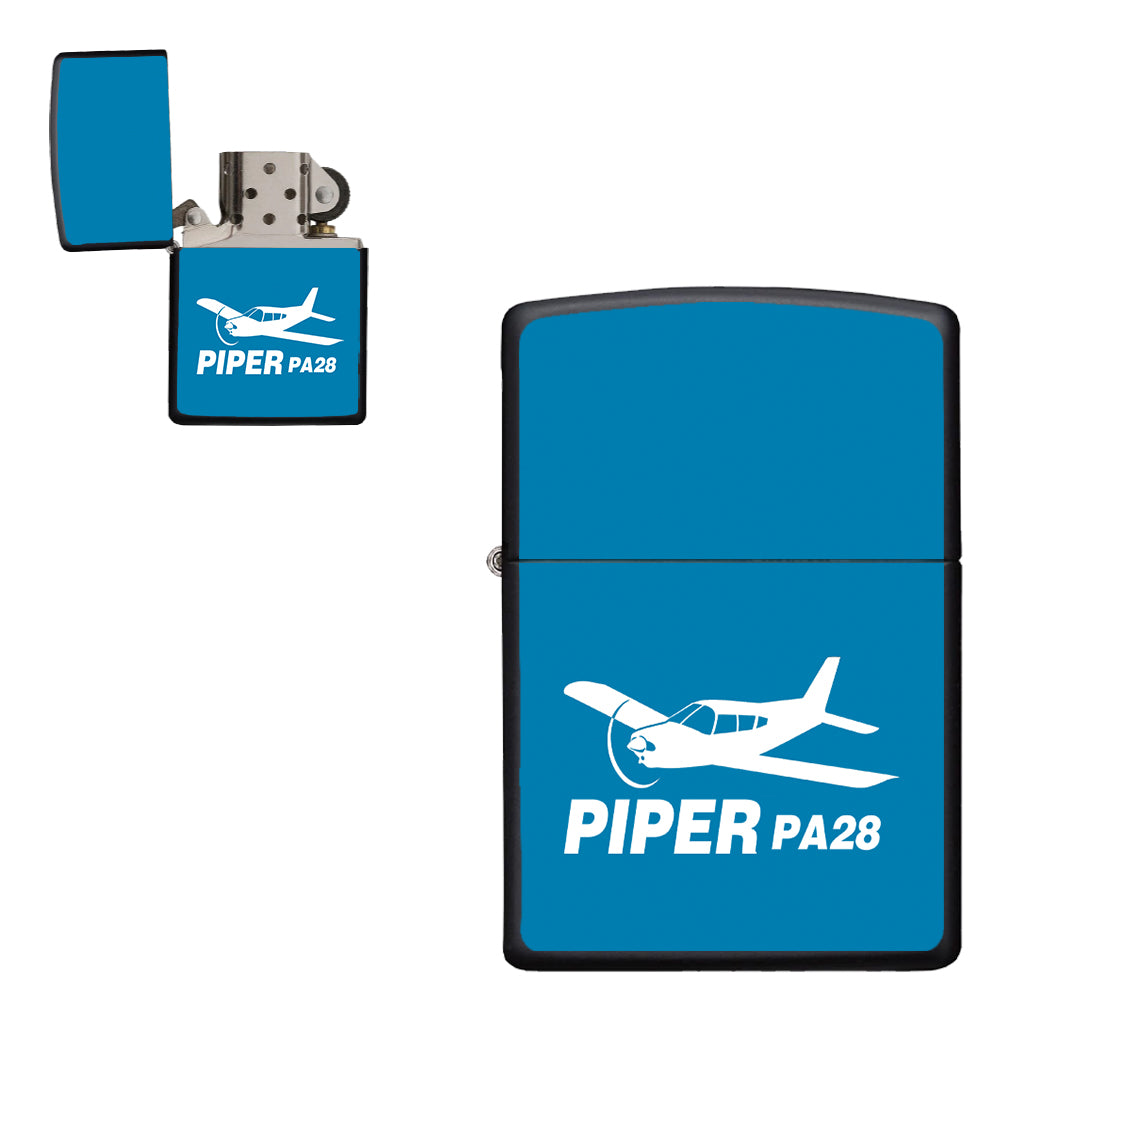 The Piper PA28 Designed Metal Lighters